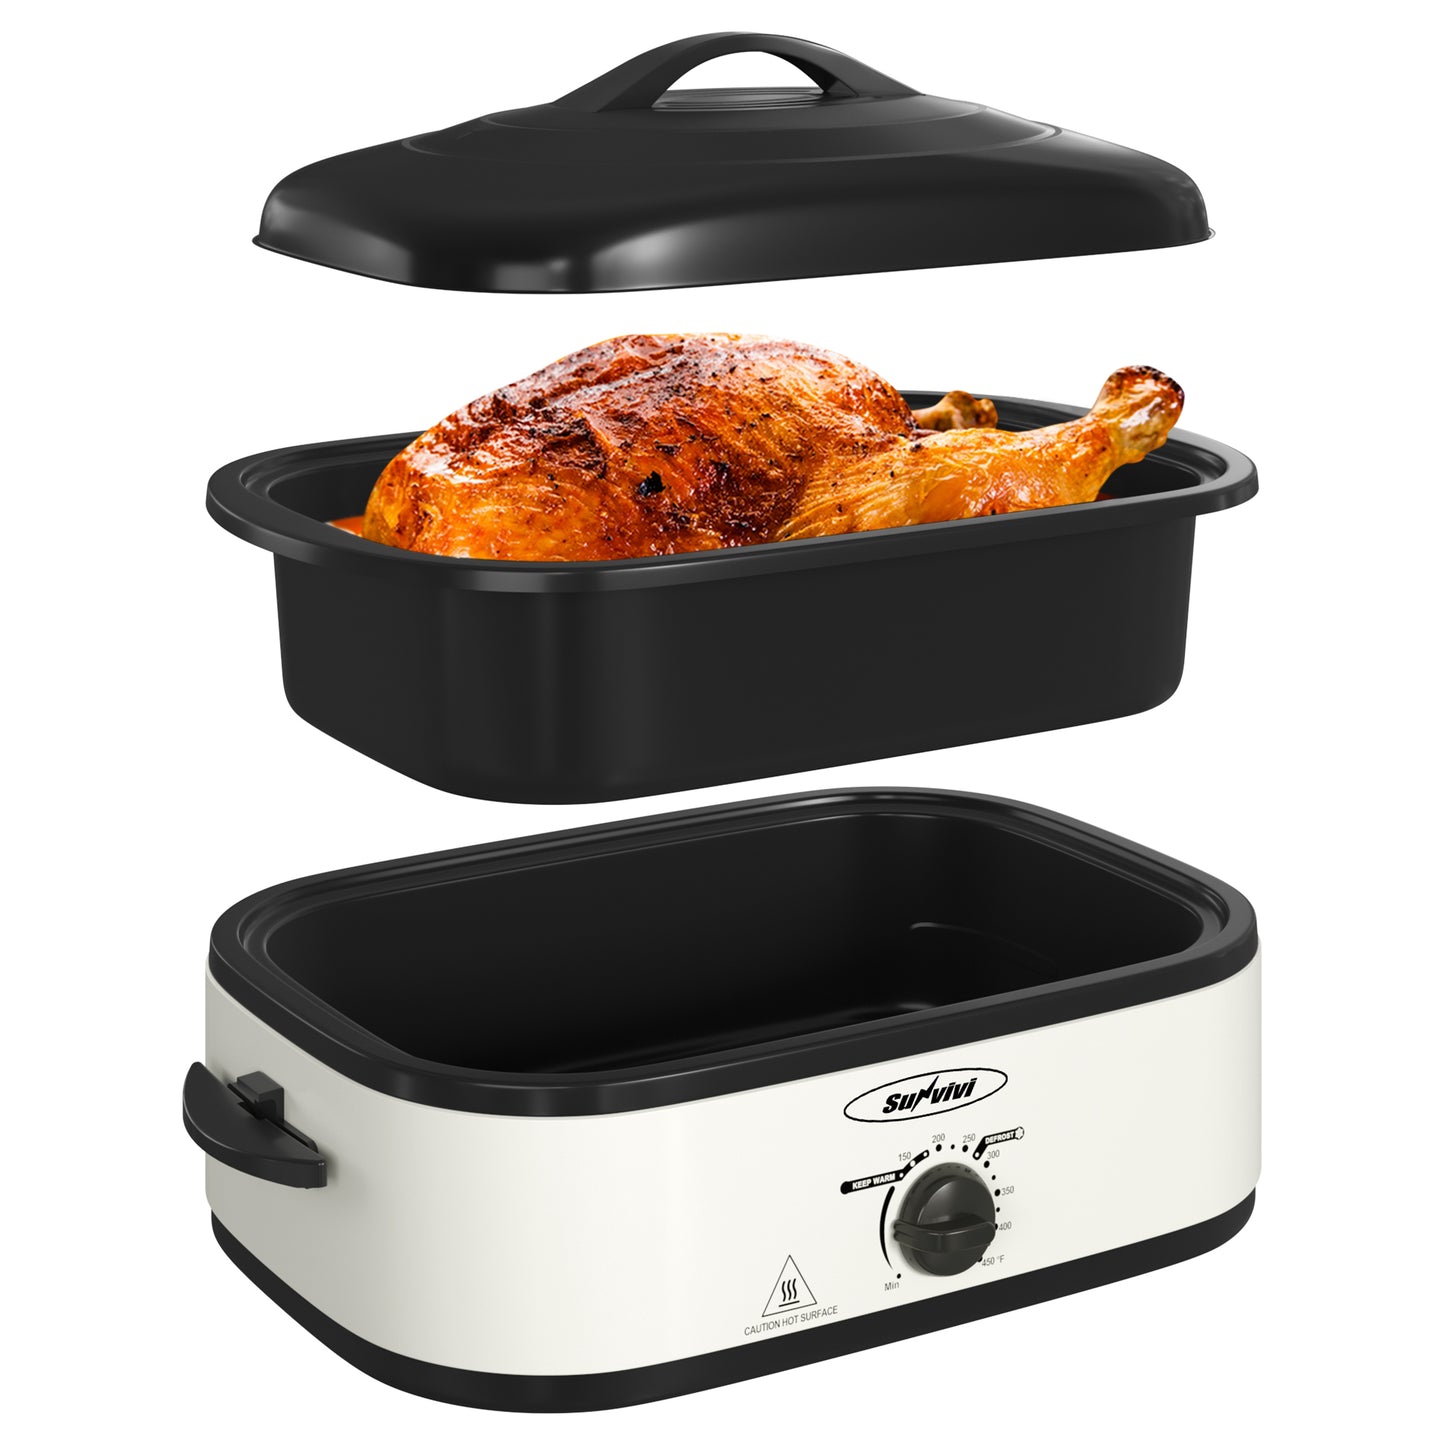 Sunvivi Roaster Oven, 14 Quart Electric Roaster with Self-Basting Lid, Turkey Roaster Oven with Removable Pan and Rack, Stainless Steel